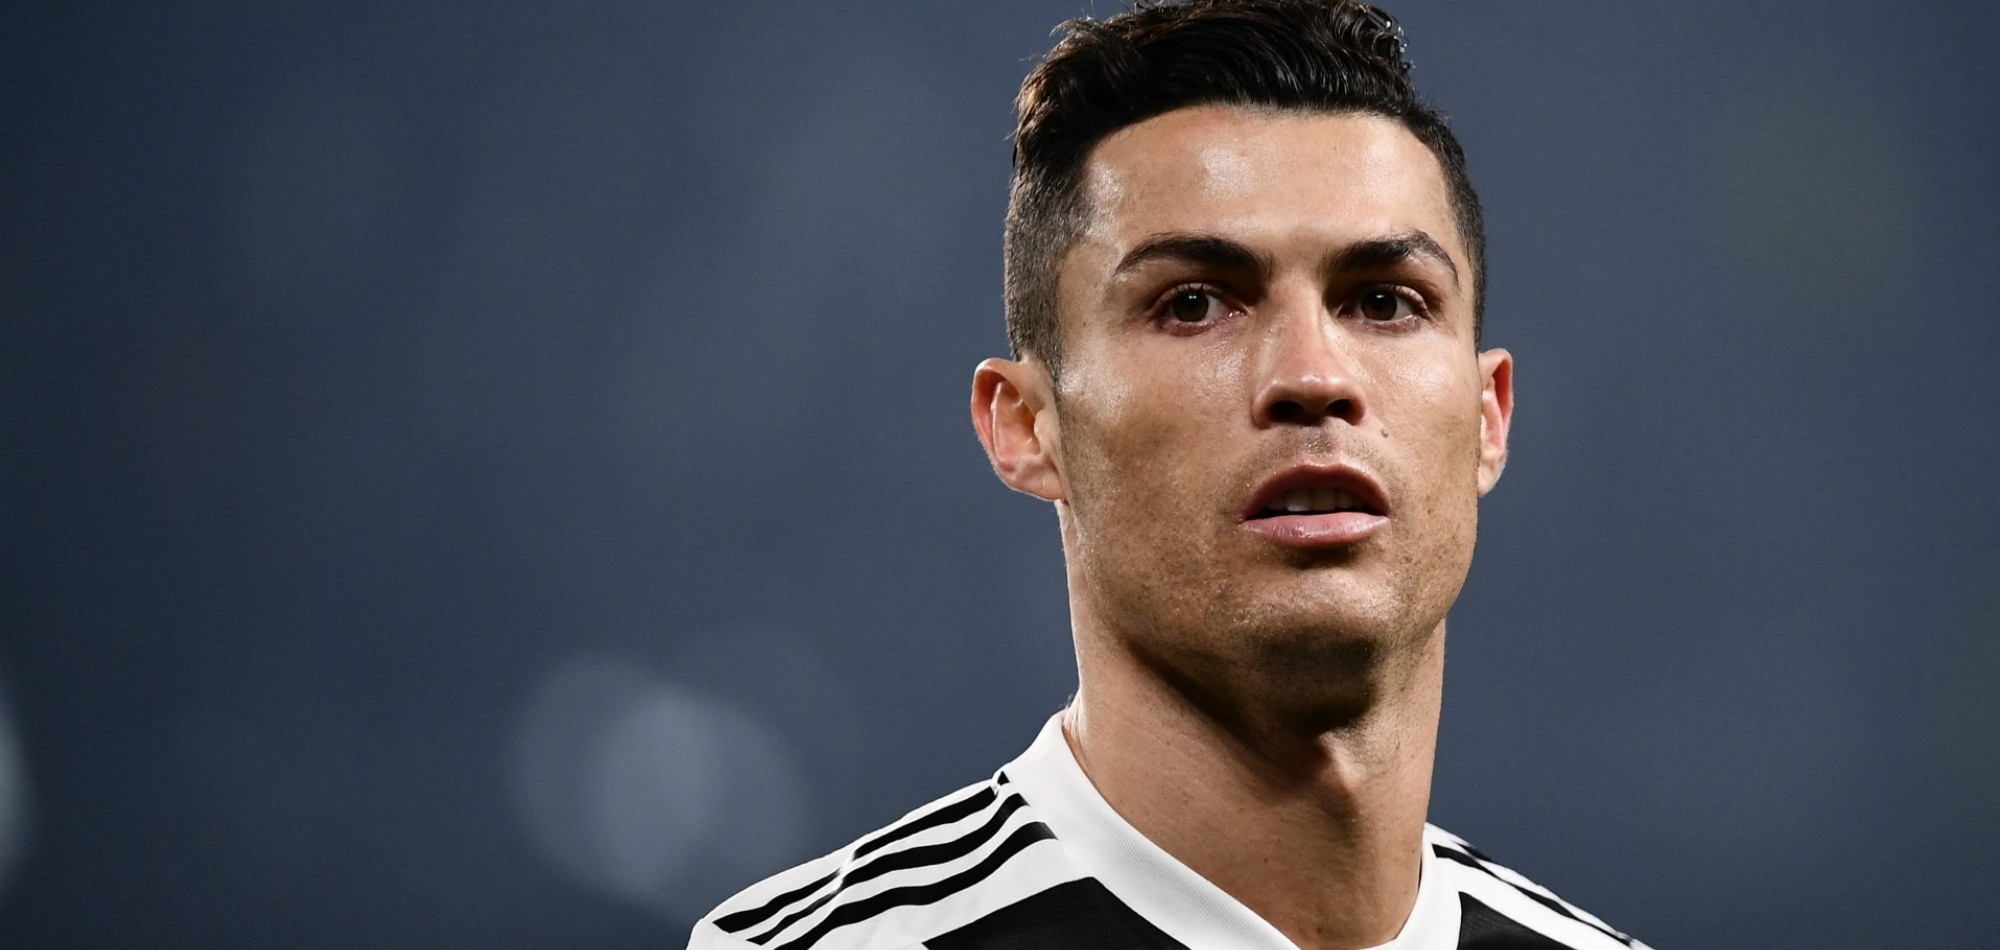 Cristiano Ronaldo committed to Juventus